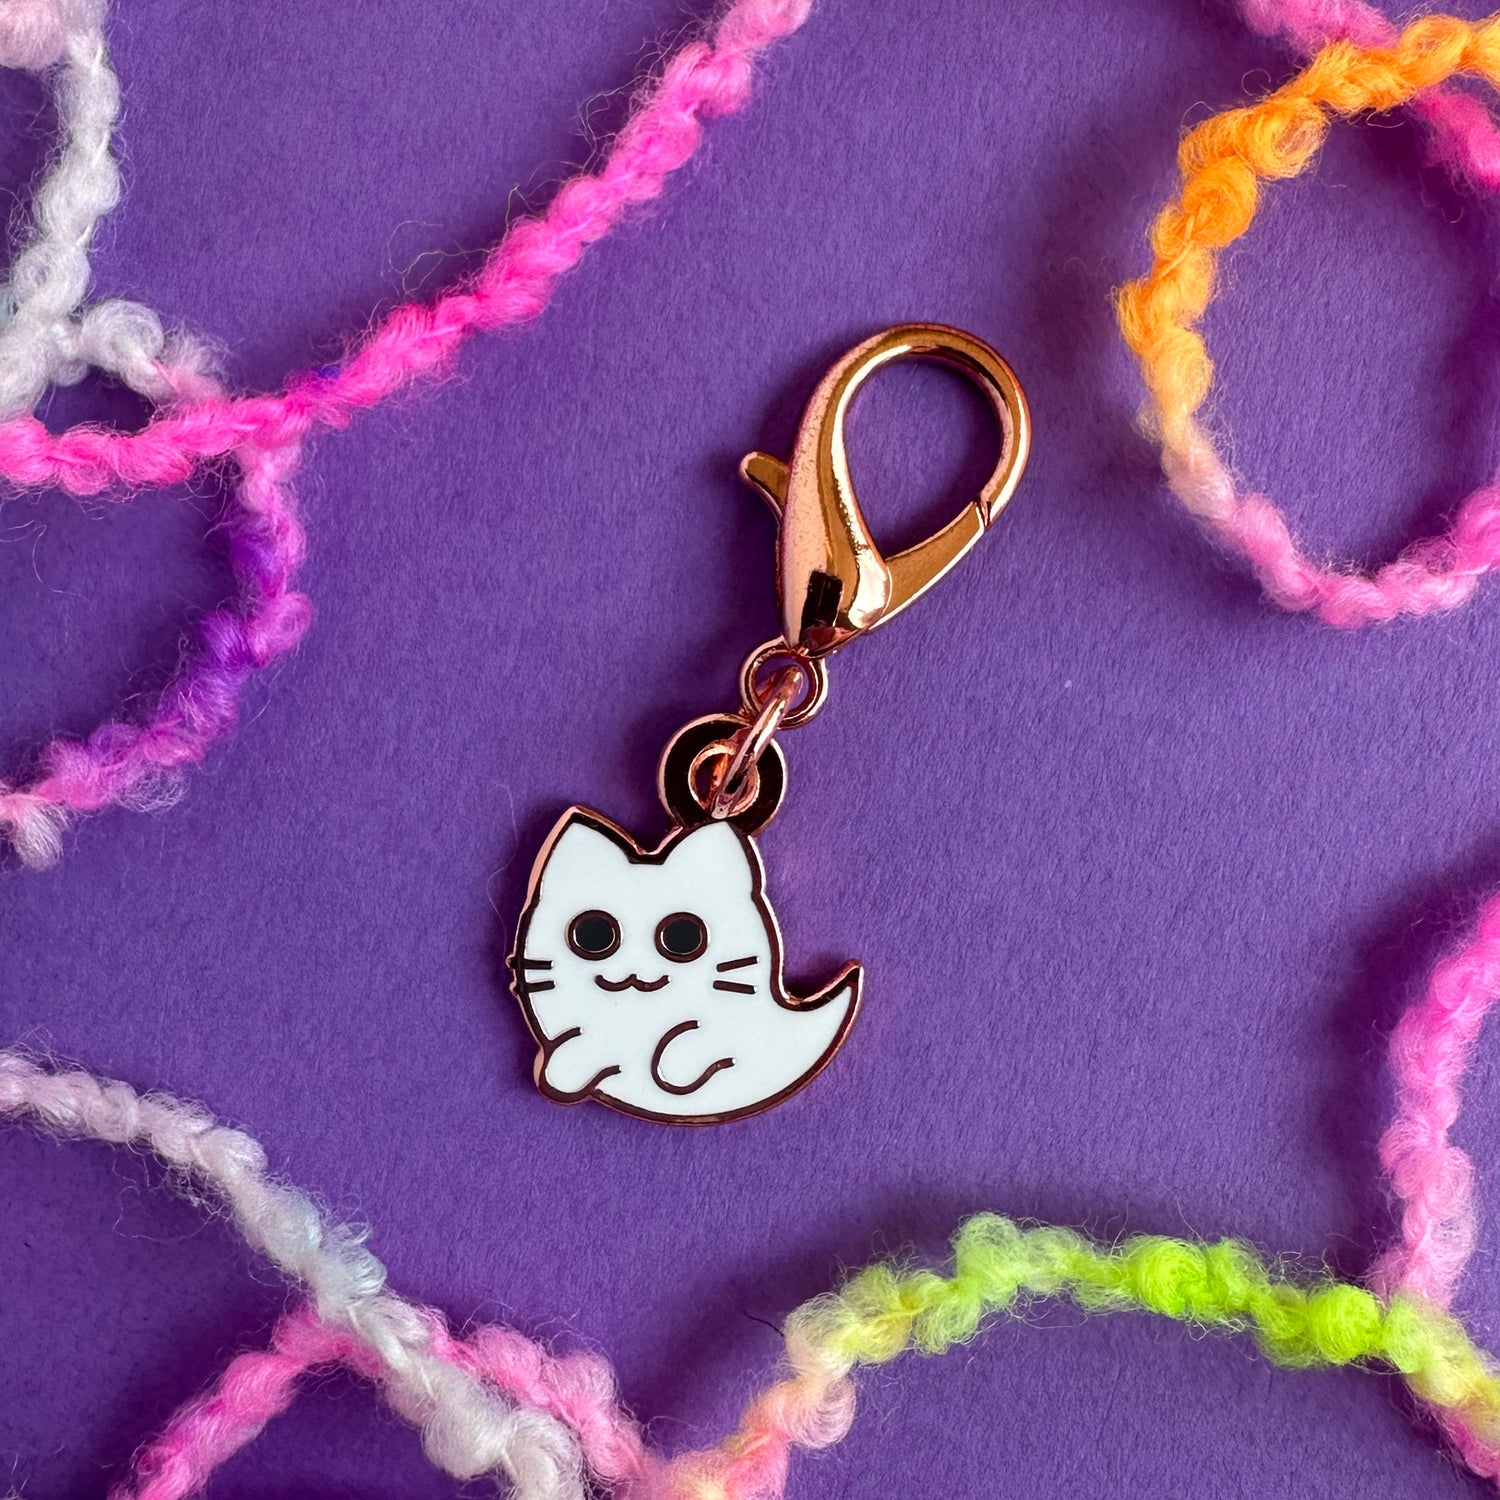 A cute ghost kitty charm with a lobster claw clasp on a purple background surrounded by brightly colored yarn. 